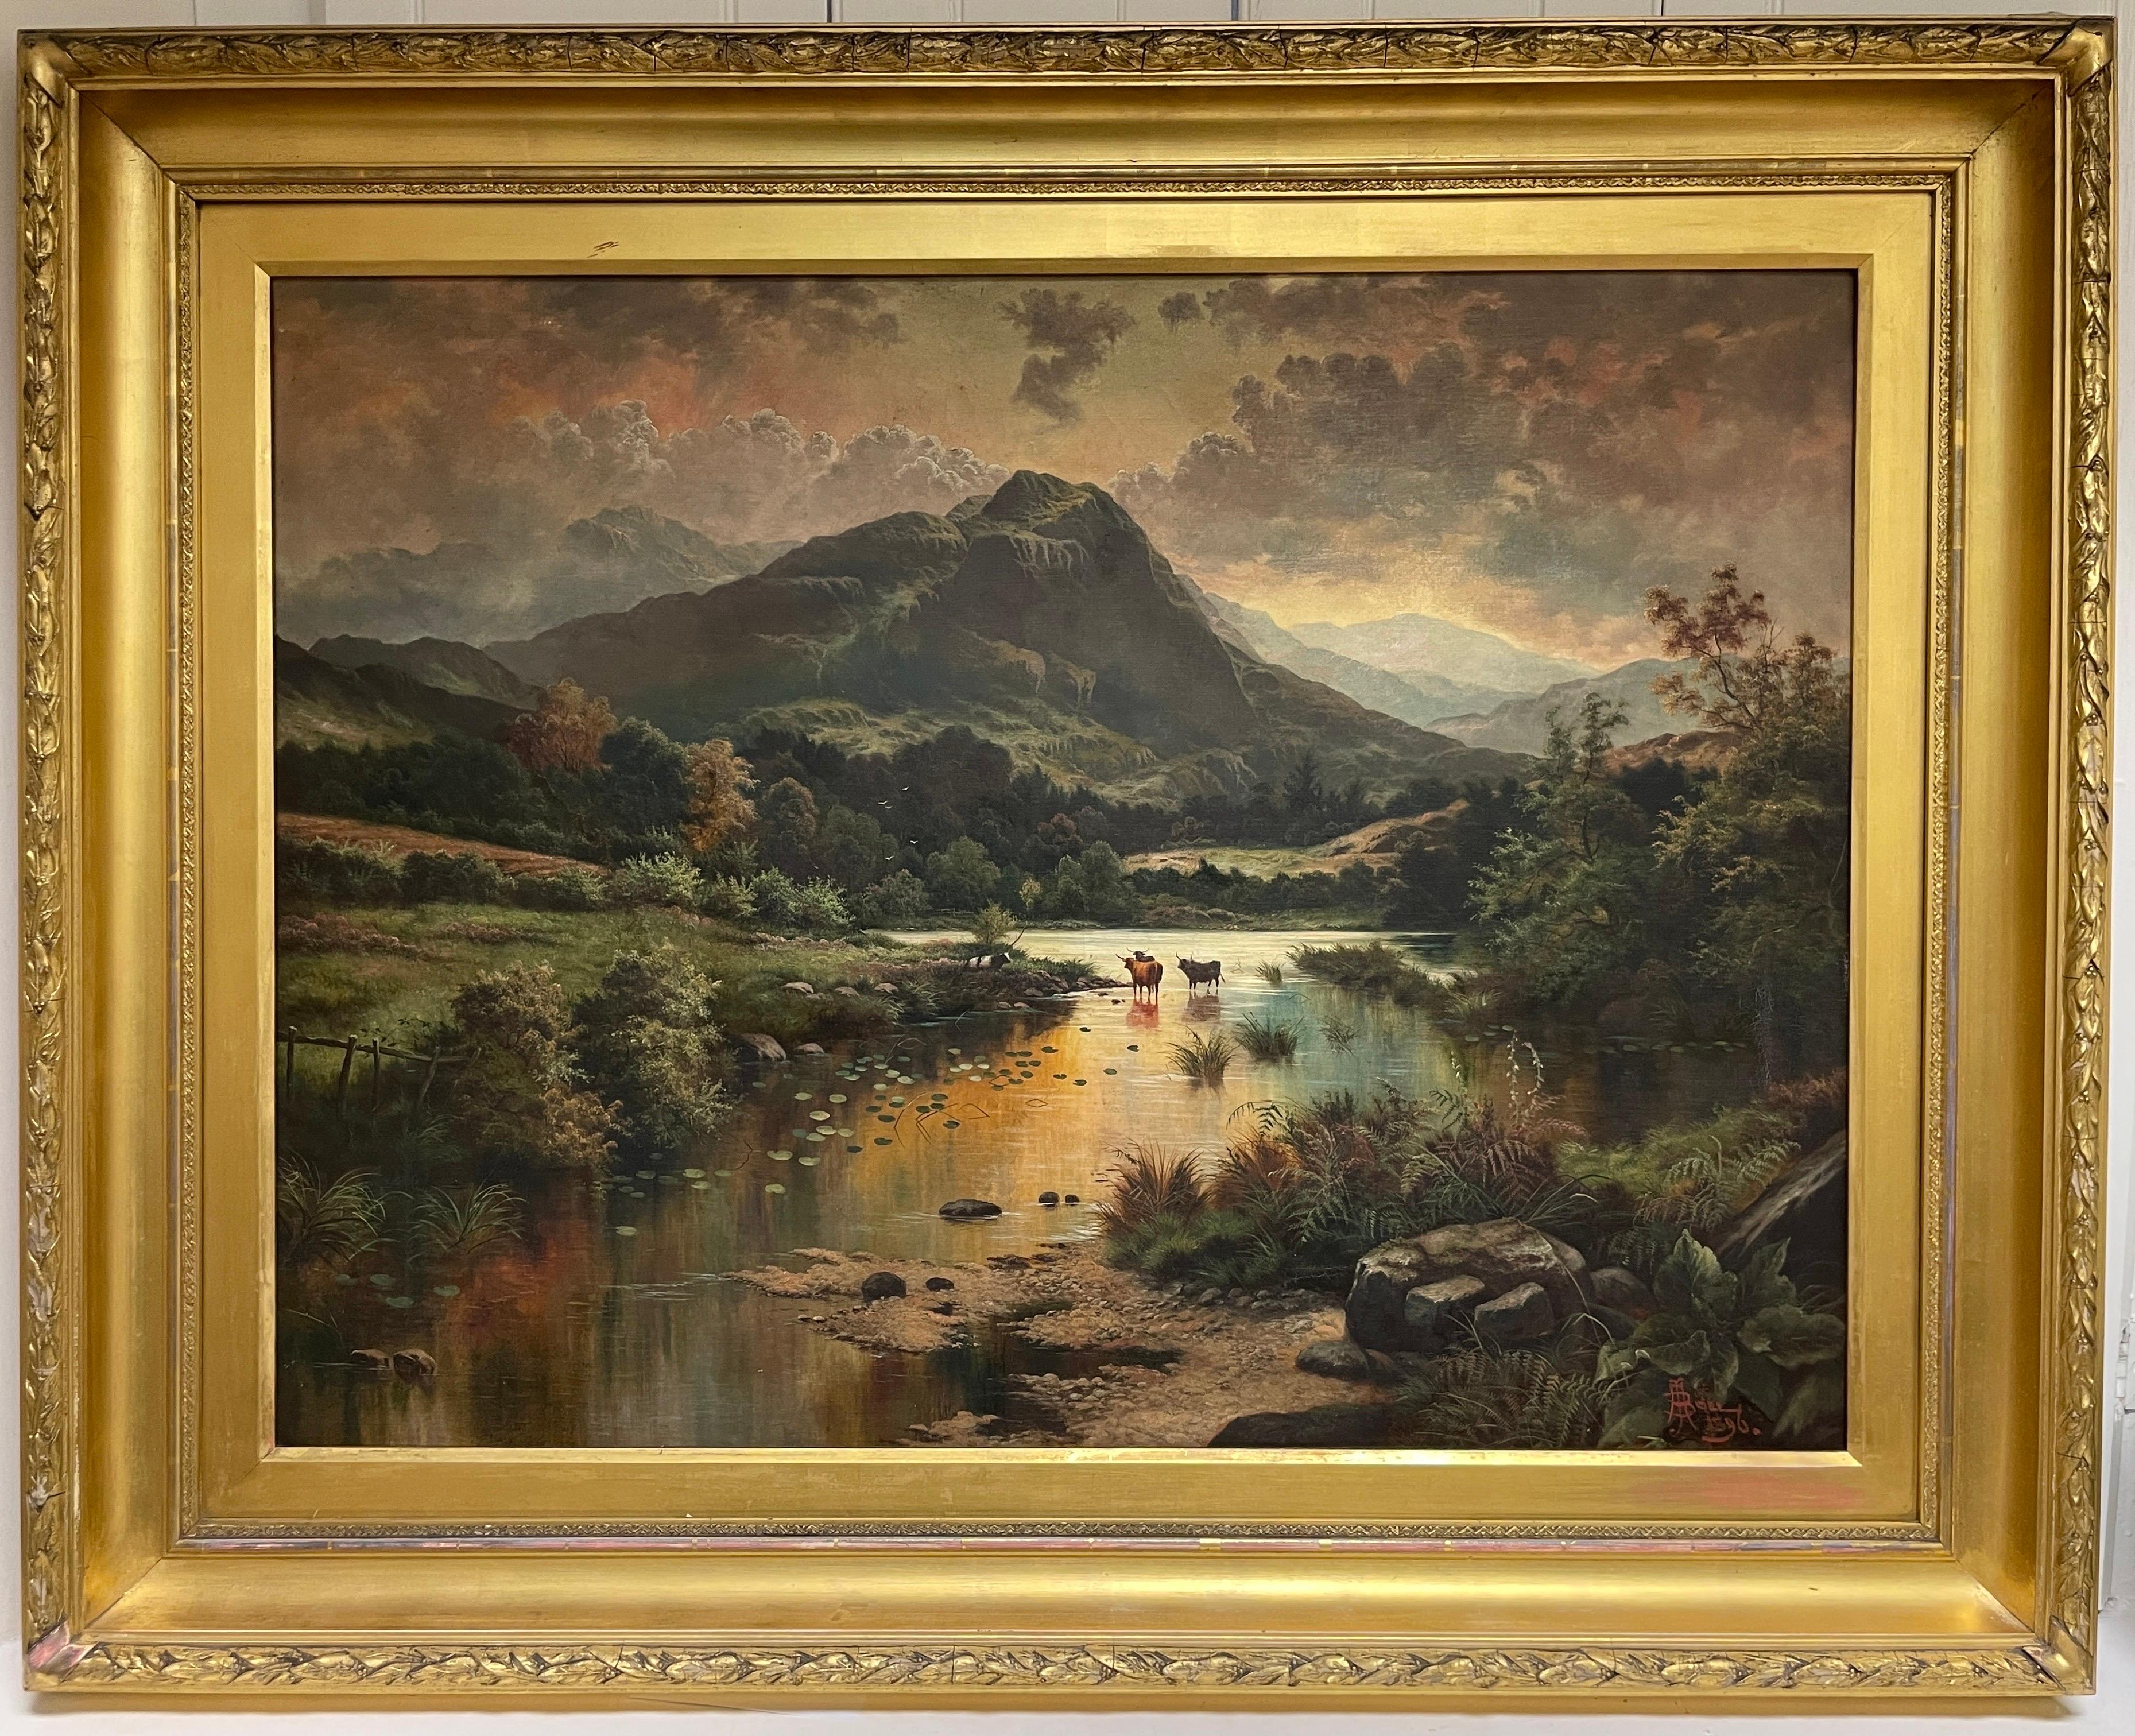 The Highland Landscape
by Joel B. Owen (British, signed and dated 1896)
oil painting on canvas: 30 x 40 inches
original antique gilt frame: 41 x 51 inches
condition: overall very good and presentable, minor old repairs visible on the back. Please